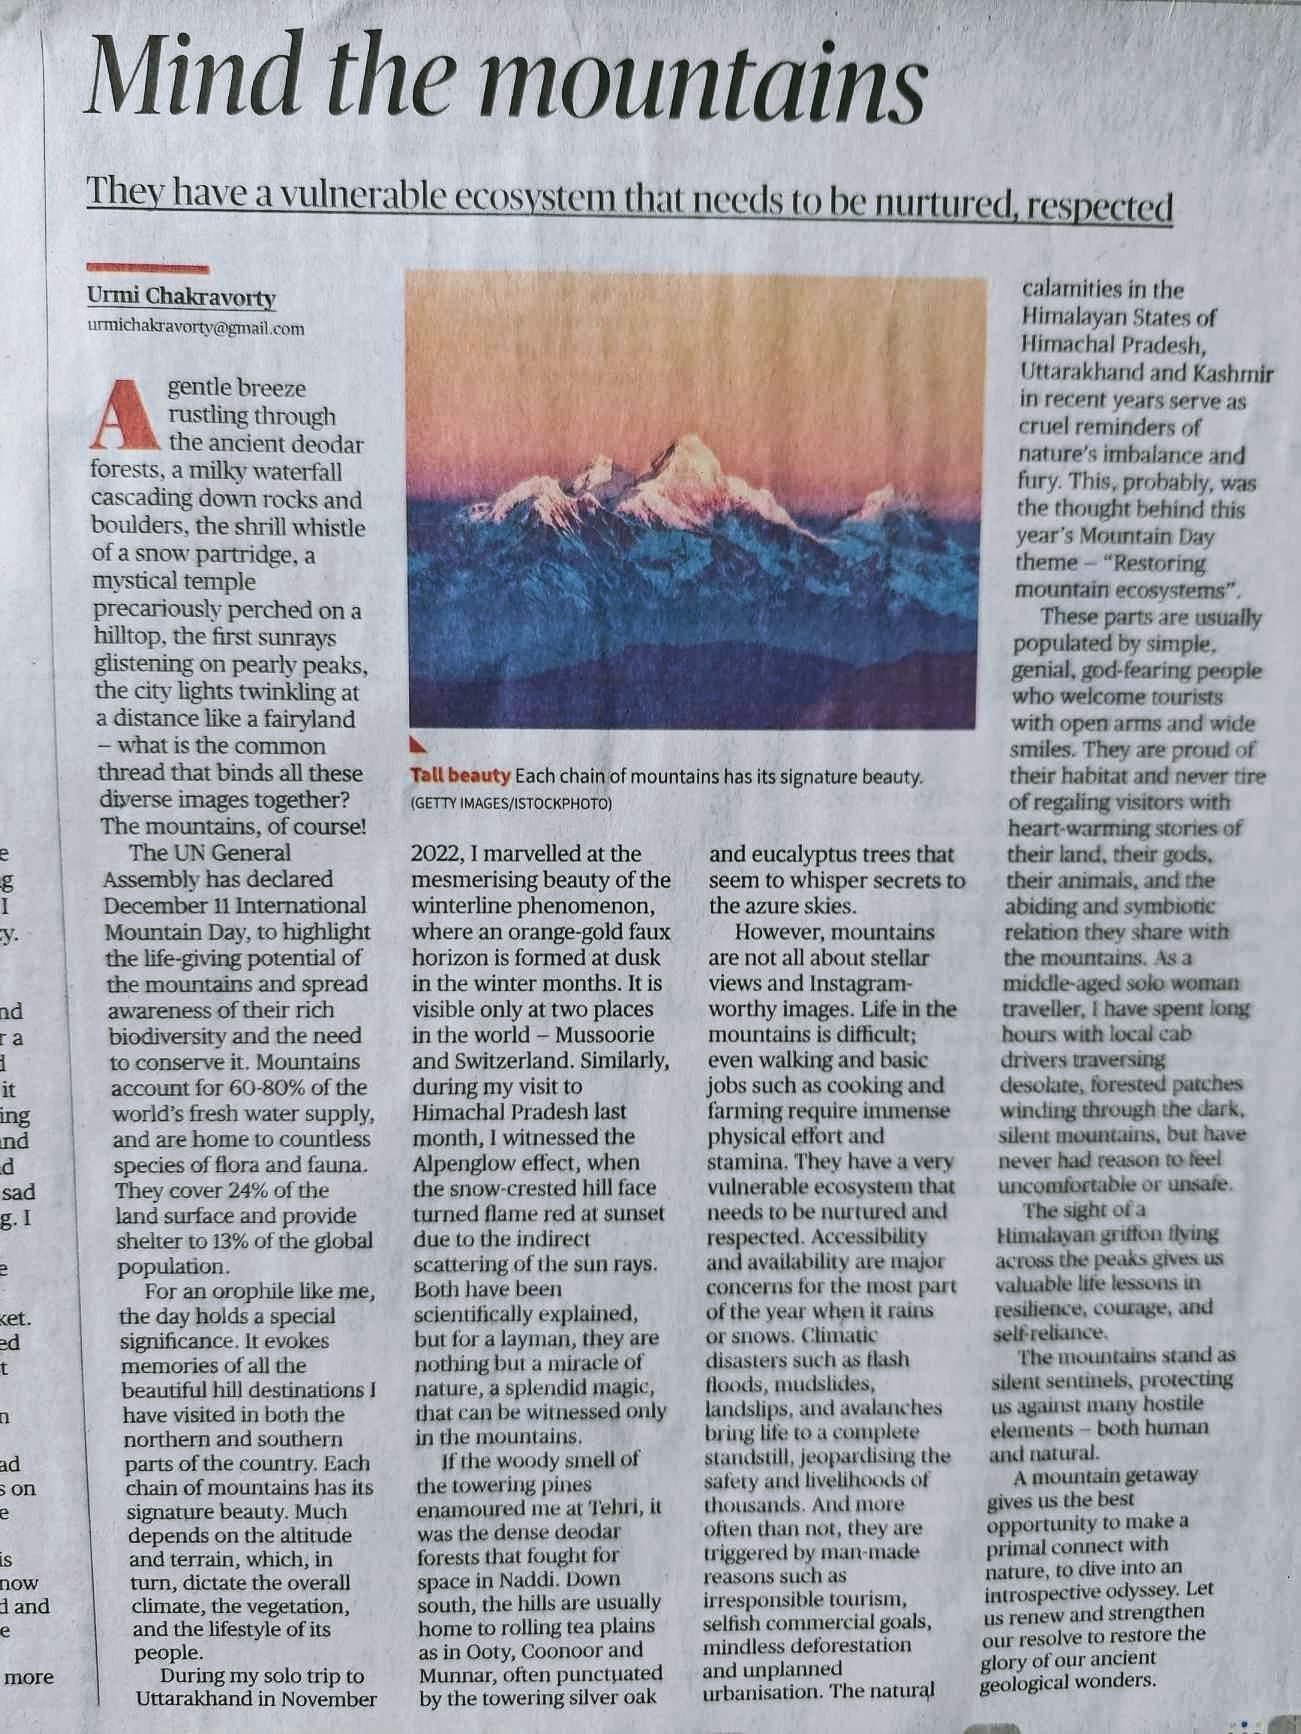 Mind the Mountains (The Hindu)